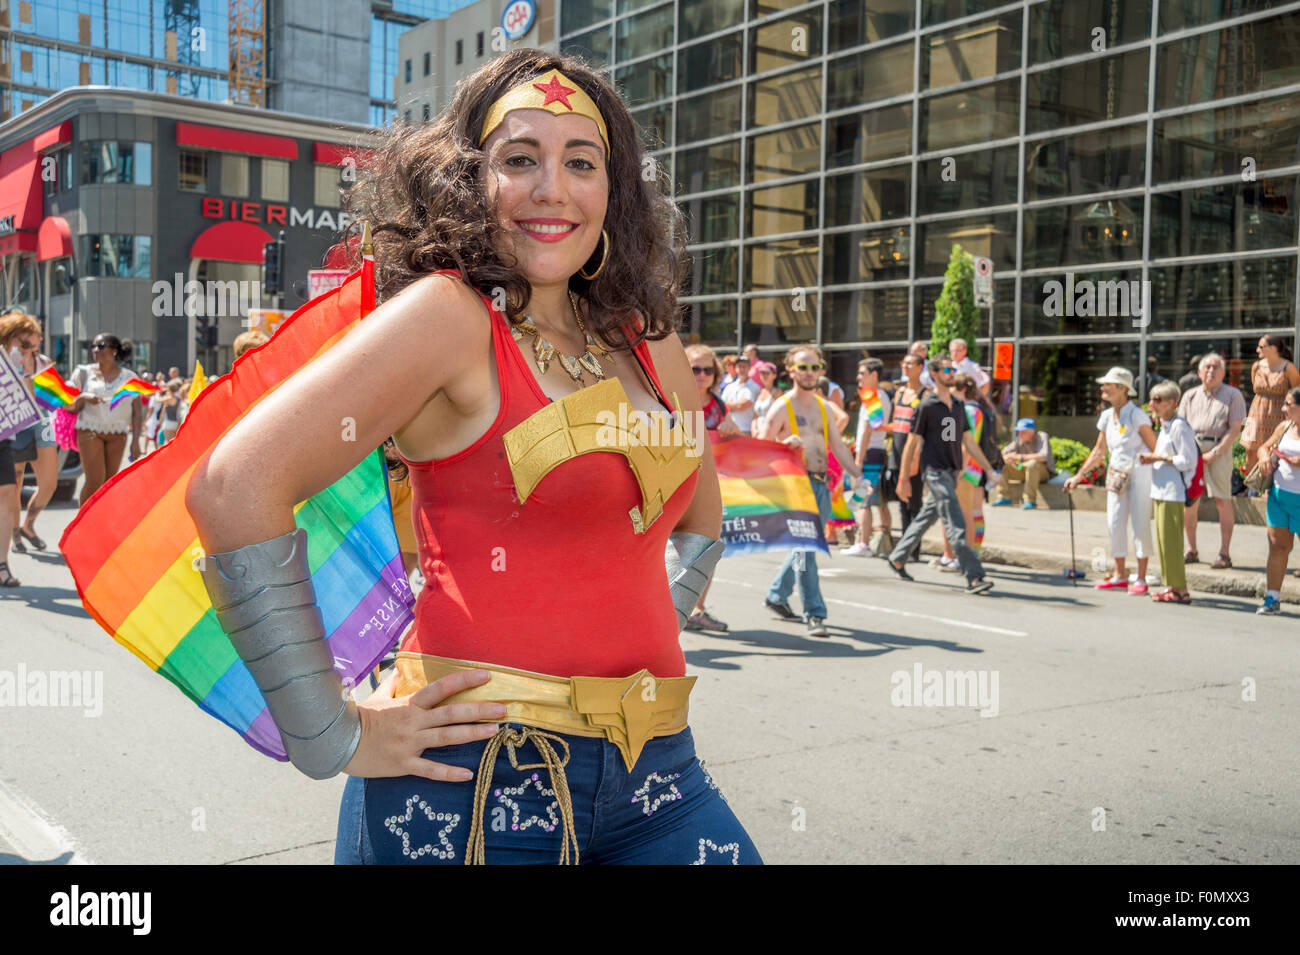 MONTREAL, CANADA, 16th August 2015. Participant impersonating Wonder Woman poses at the 2015 Gay Pride Parade in Montreal. © Marc Bruxelle/Alamy Live News Stock Photo